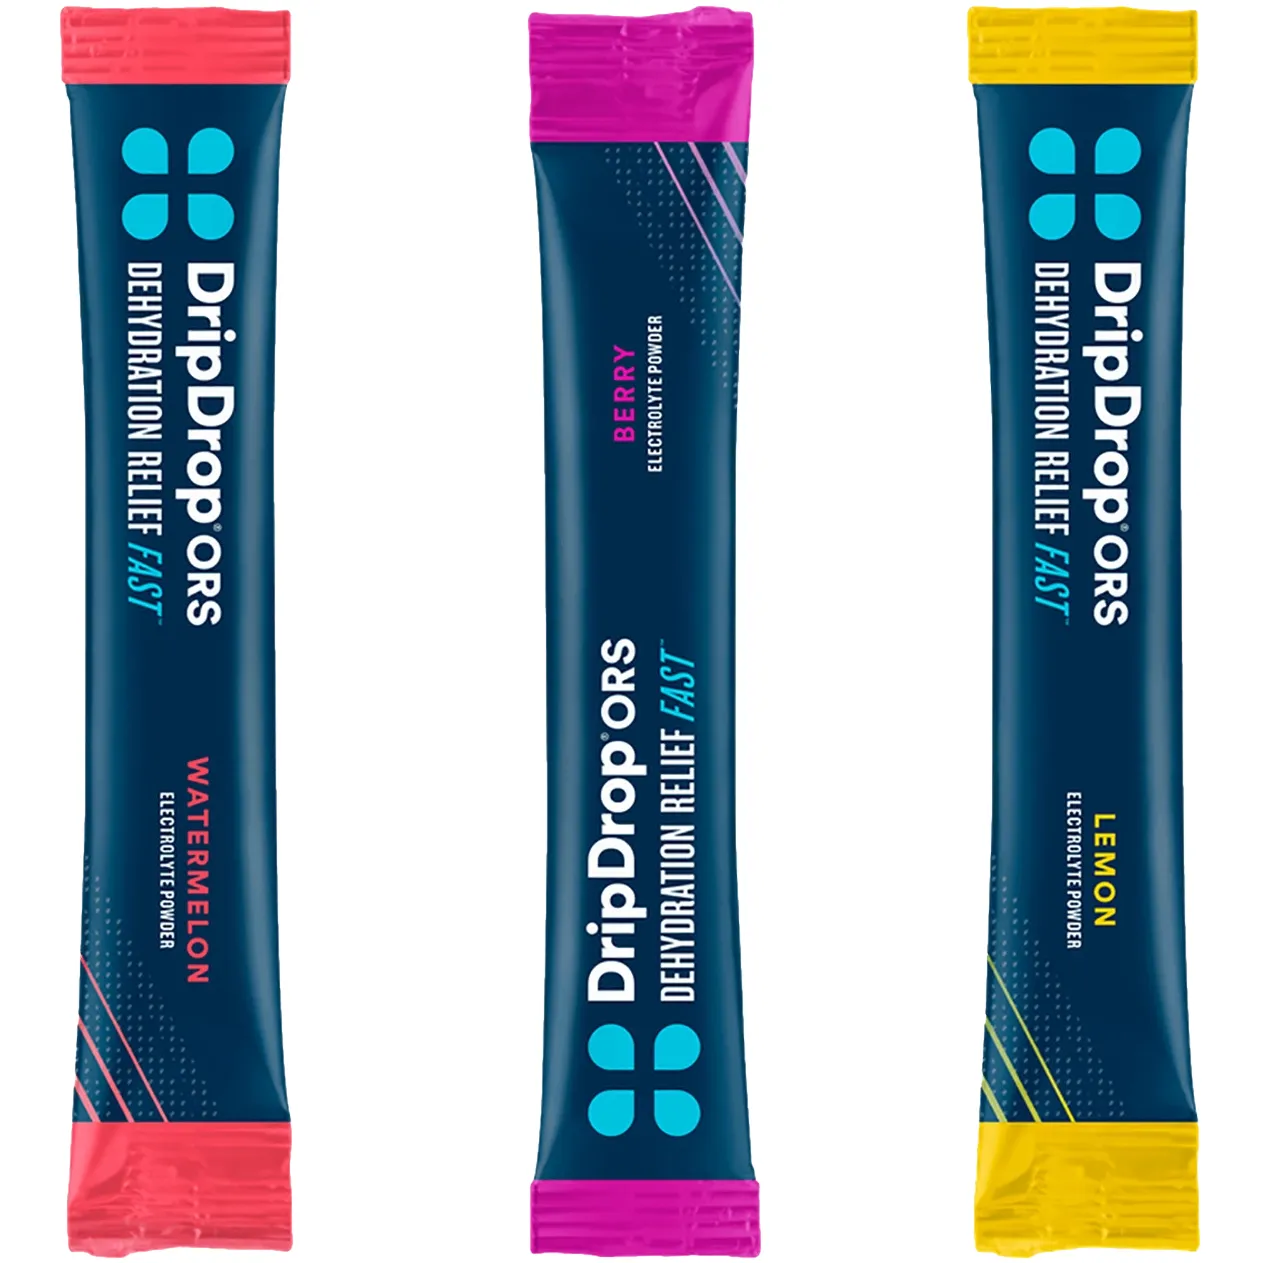 Free Dripdrop Hydration Relief Sample Pack